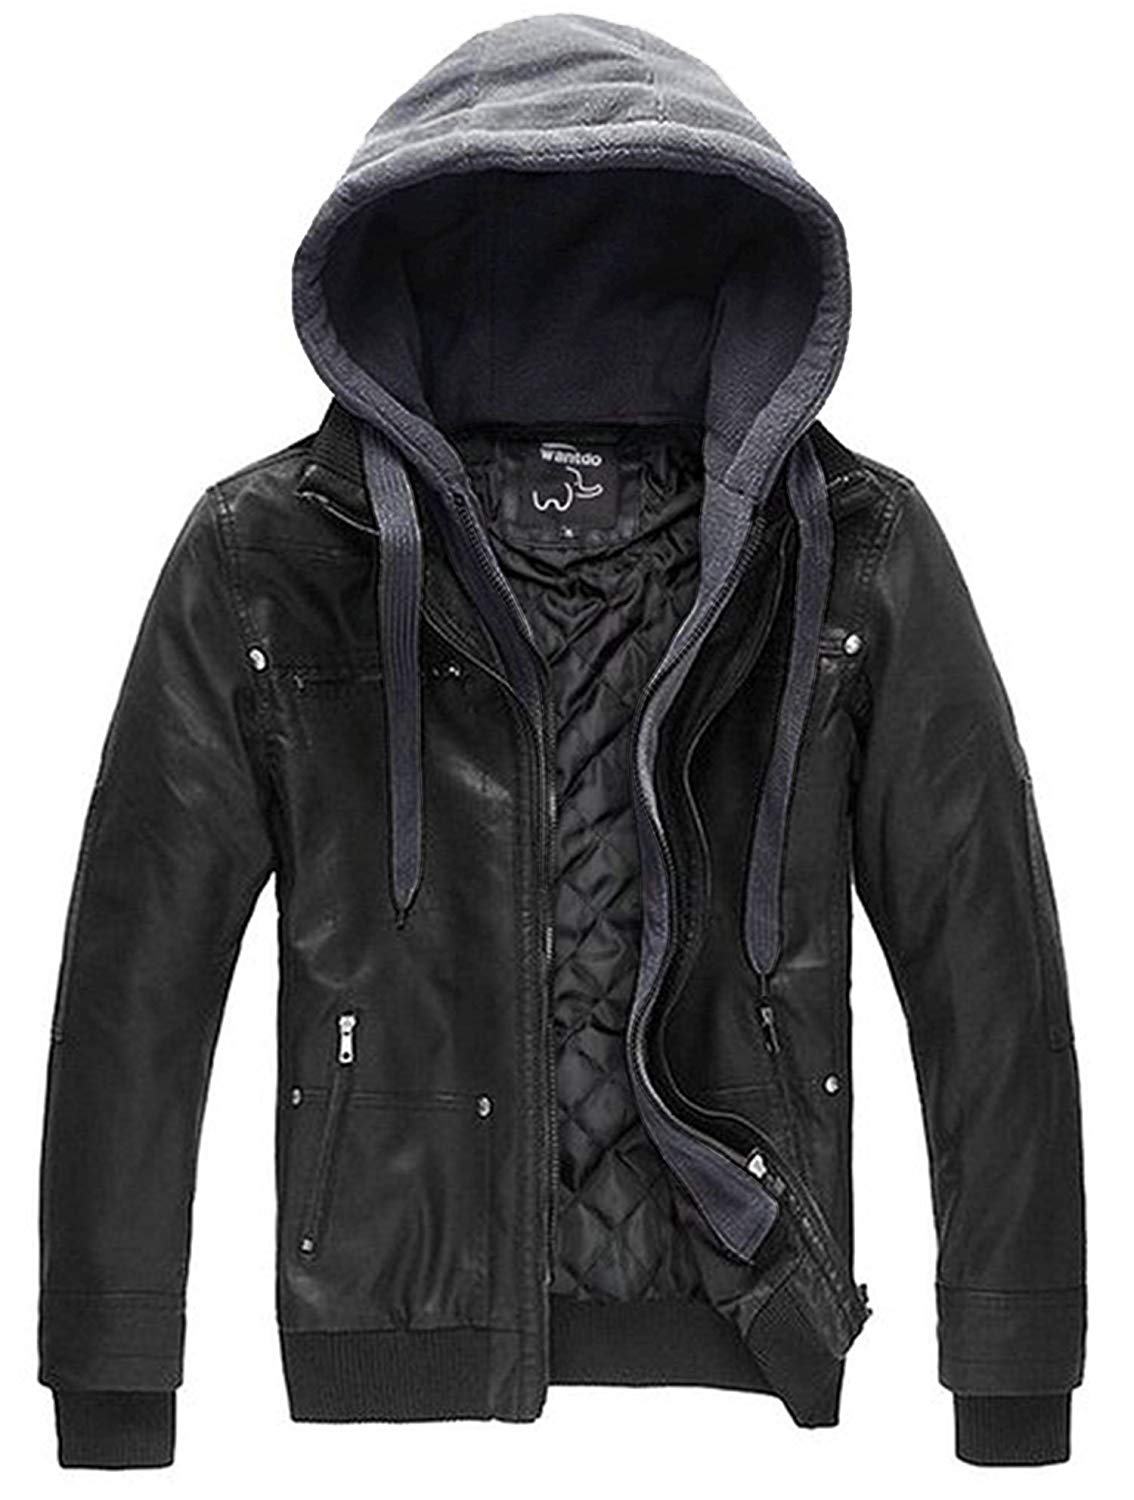 Wantdo Men's Faux Leather Jacket with Removable Hood